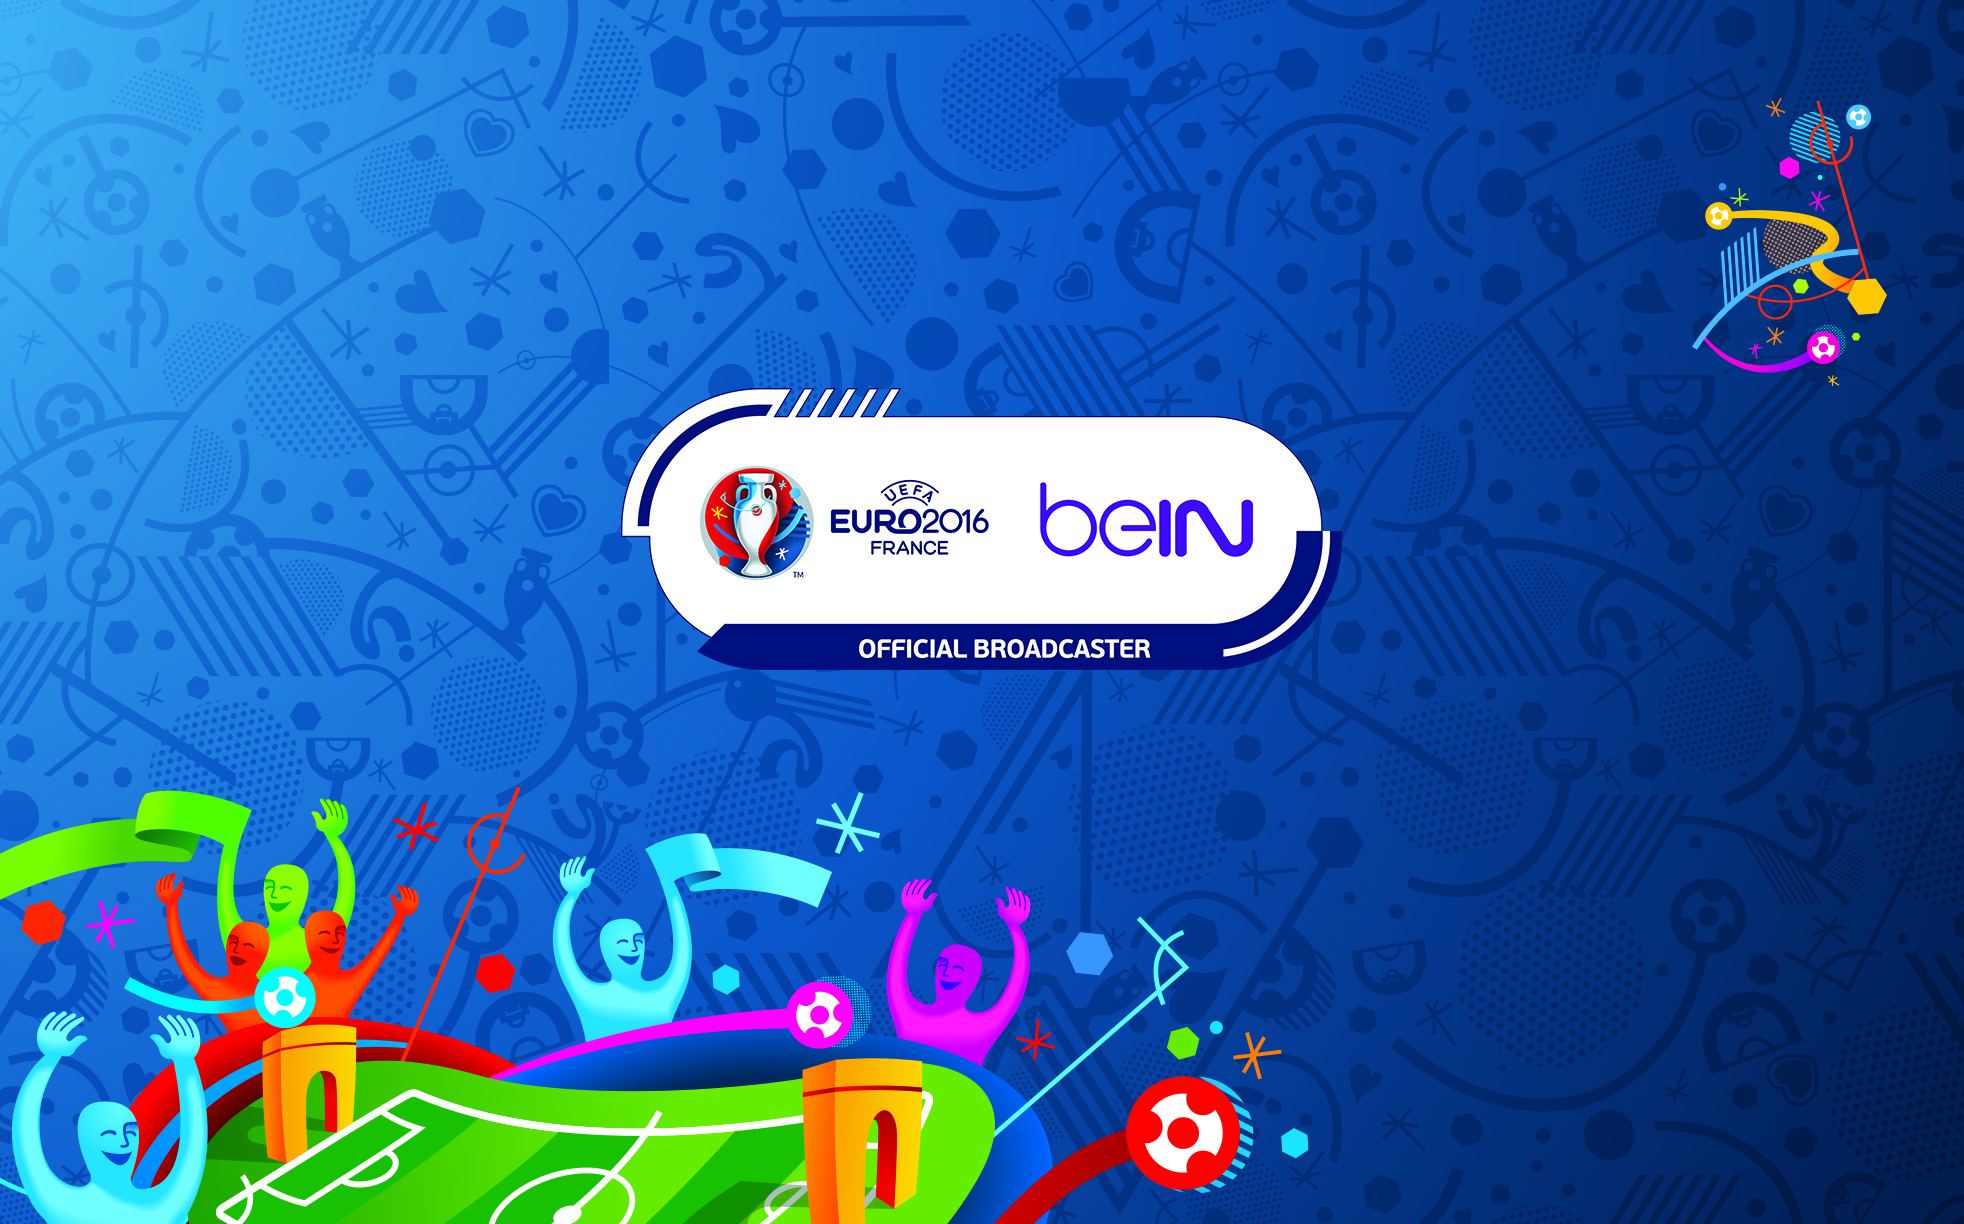 beIN lines up football stars, celebrity experts and top analysts for an amazing UEFA Euro 2016 coverage